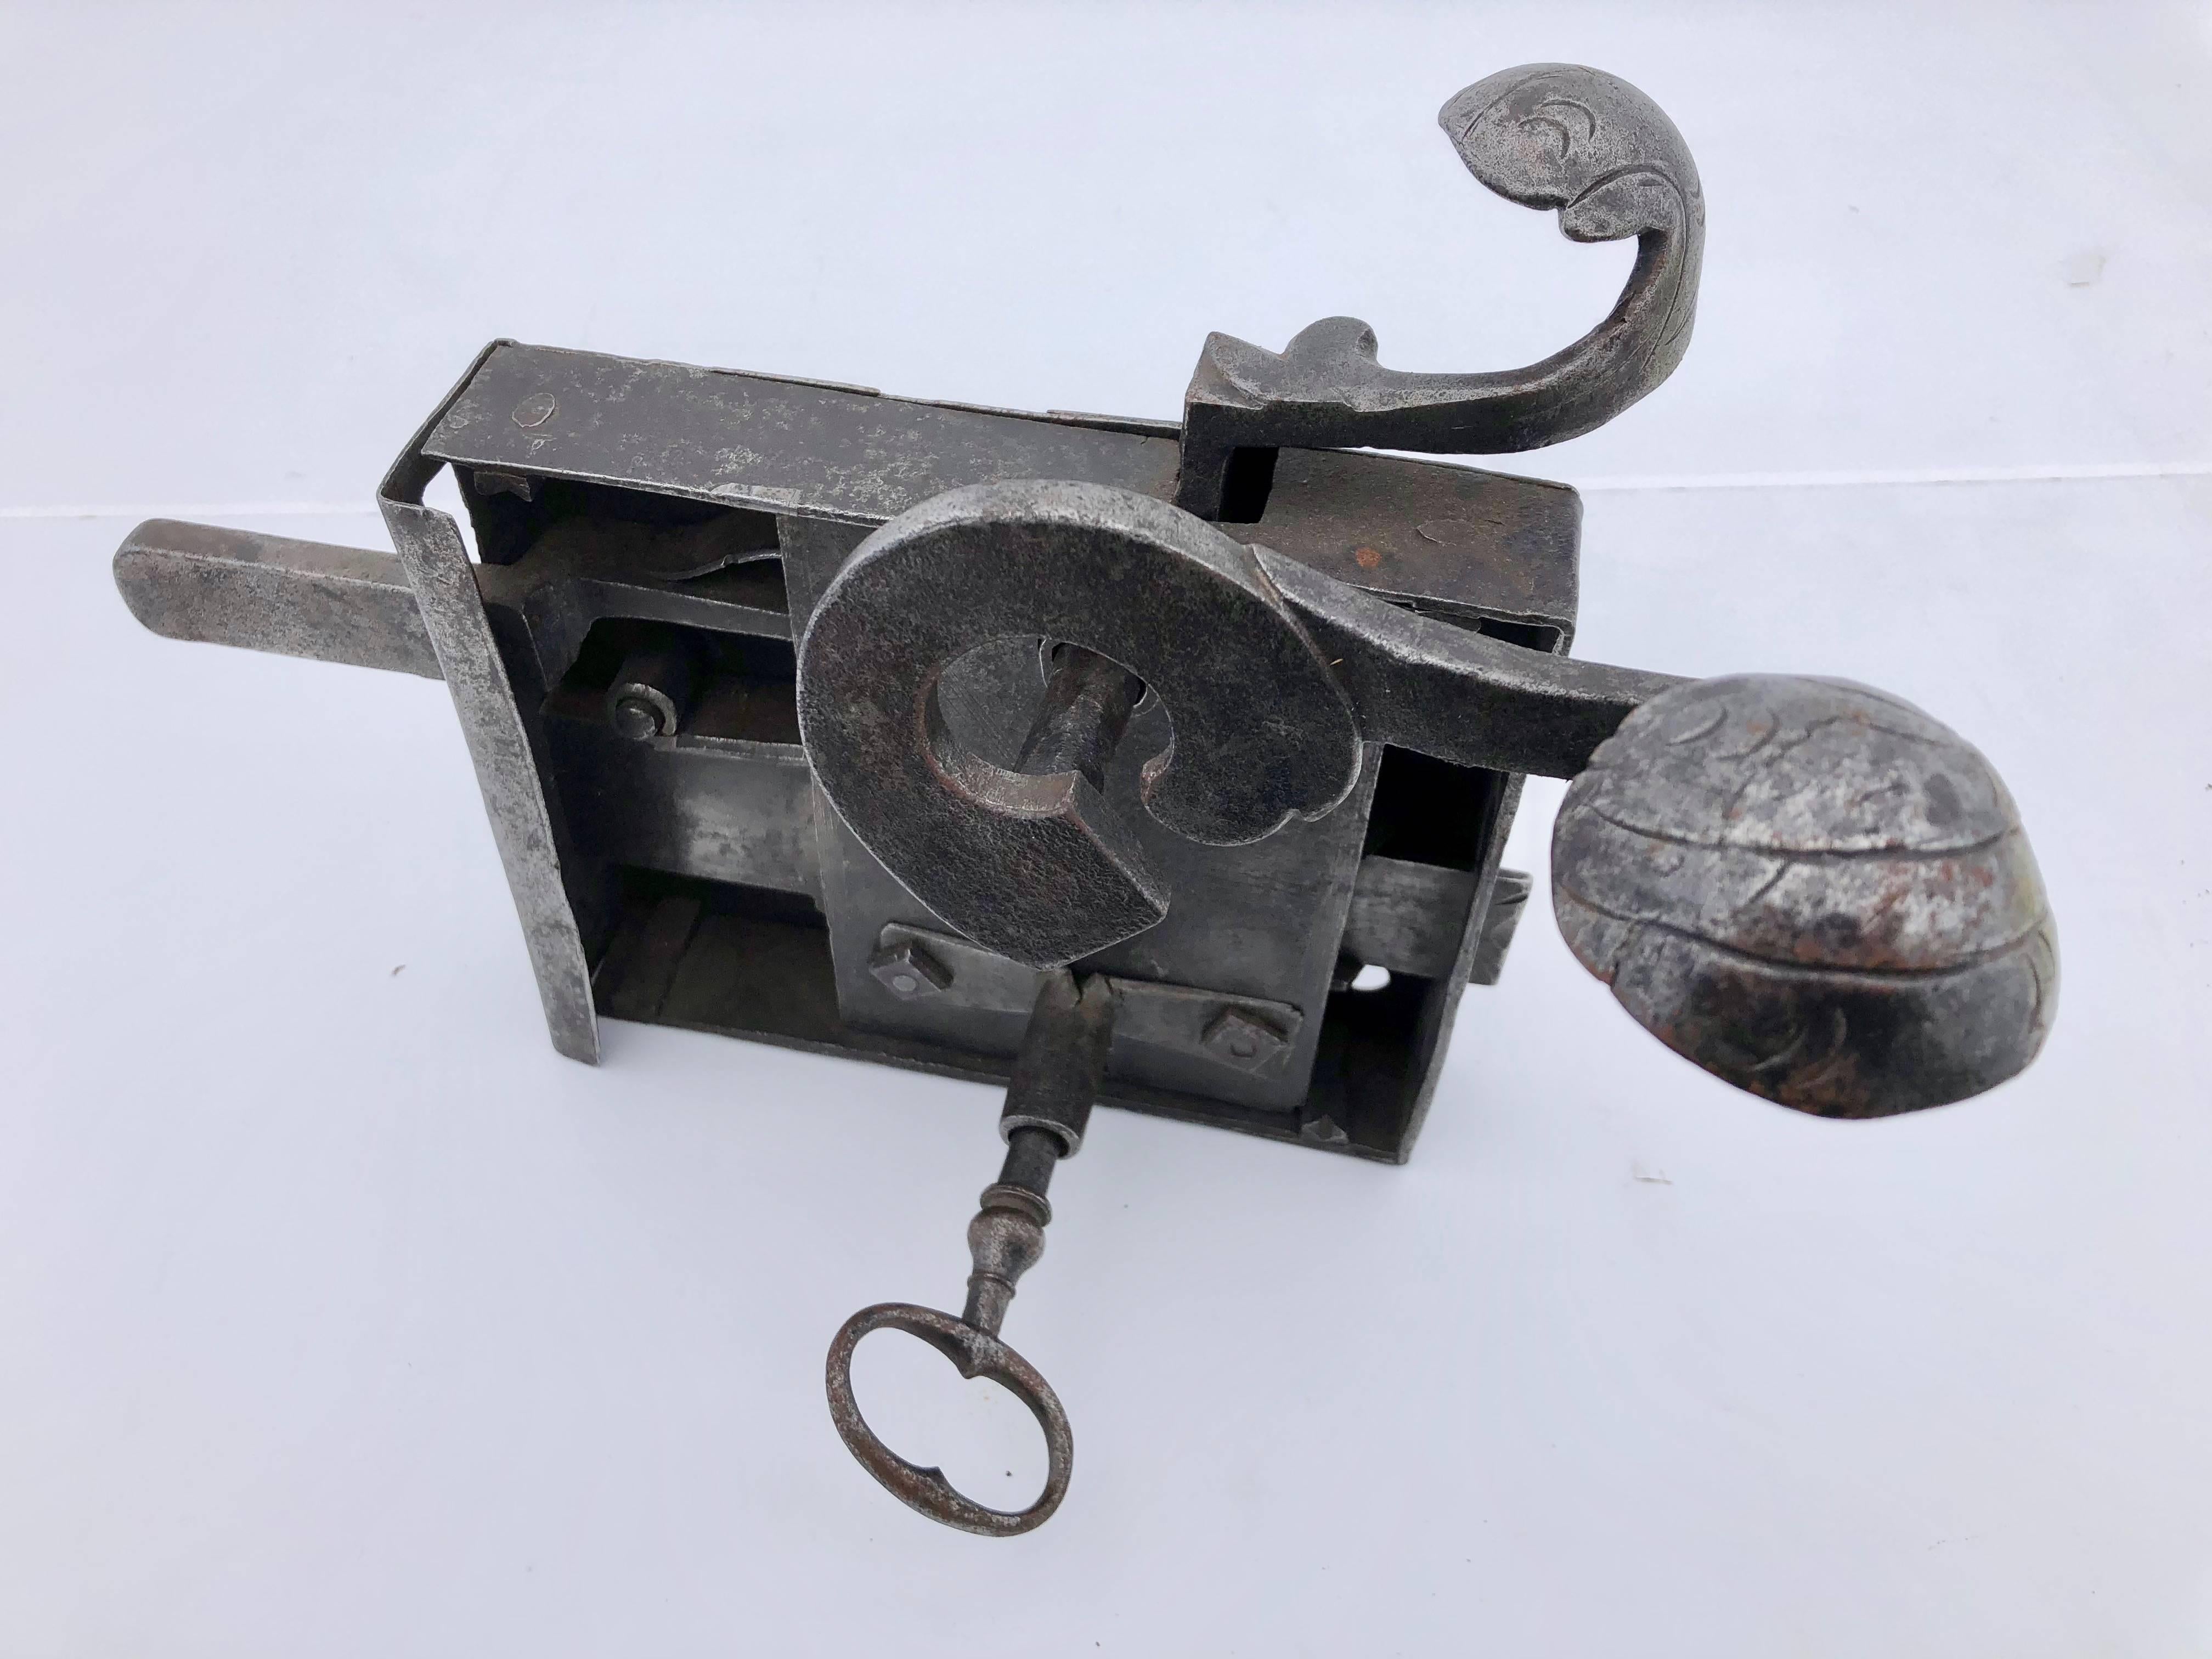 This Louis XVI French hand-wrought lock is absolutely gorgeous. It comes with it's own forged key and has a box shape frame with a deadbolt and a latch that work from both the front and the back. The front has a small lever which operates the latch